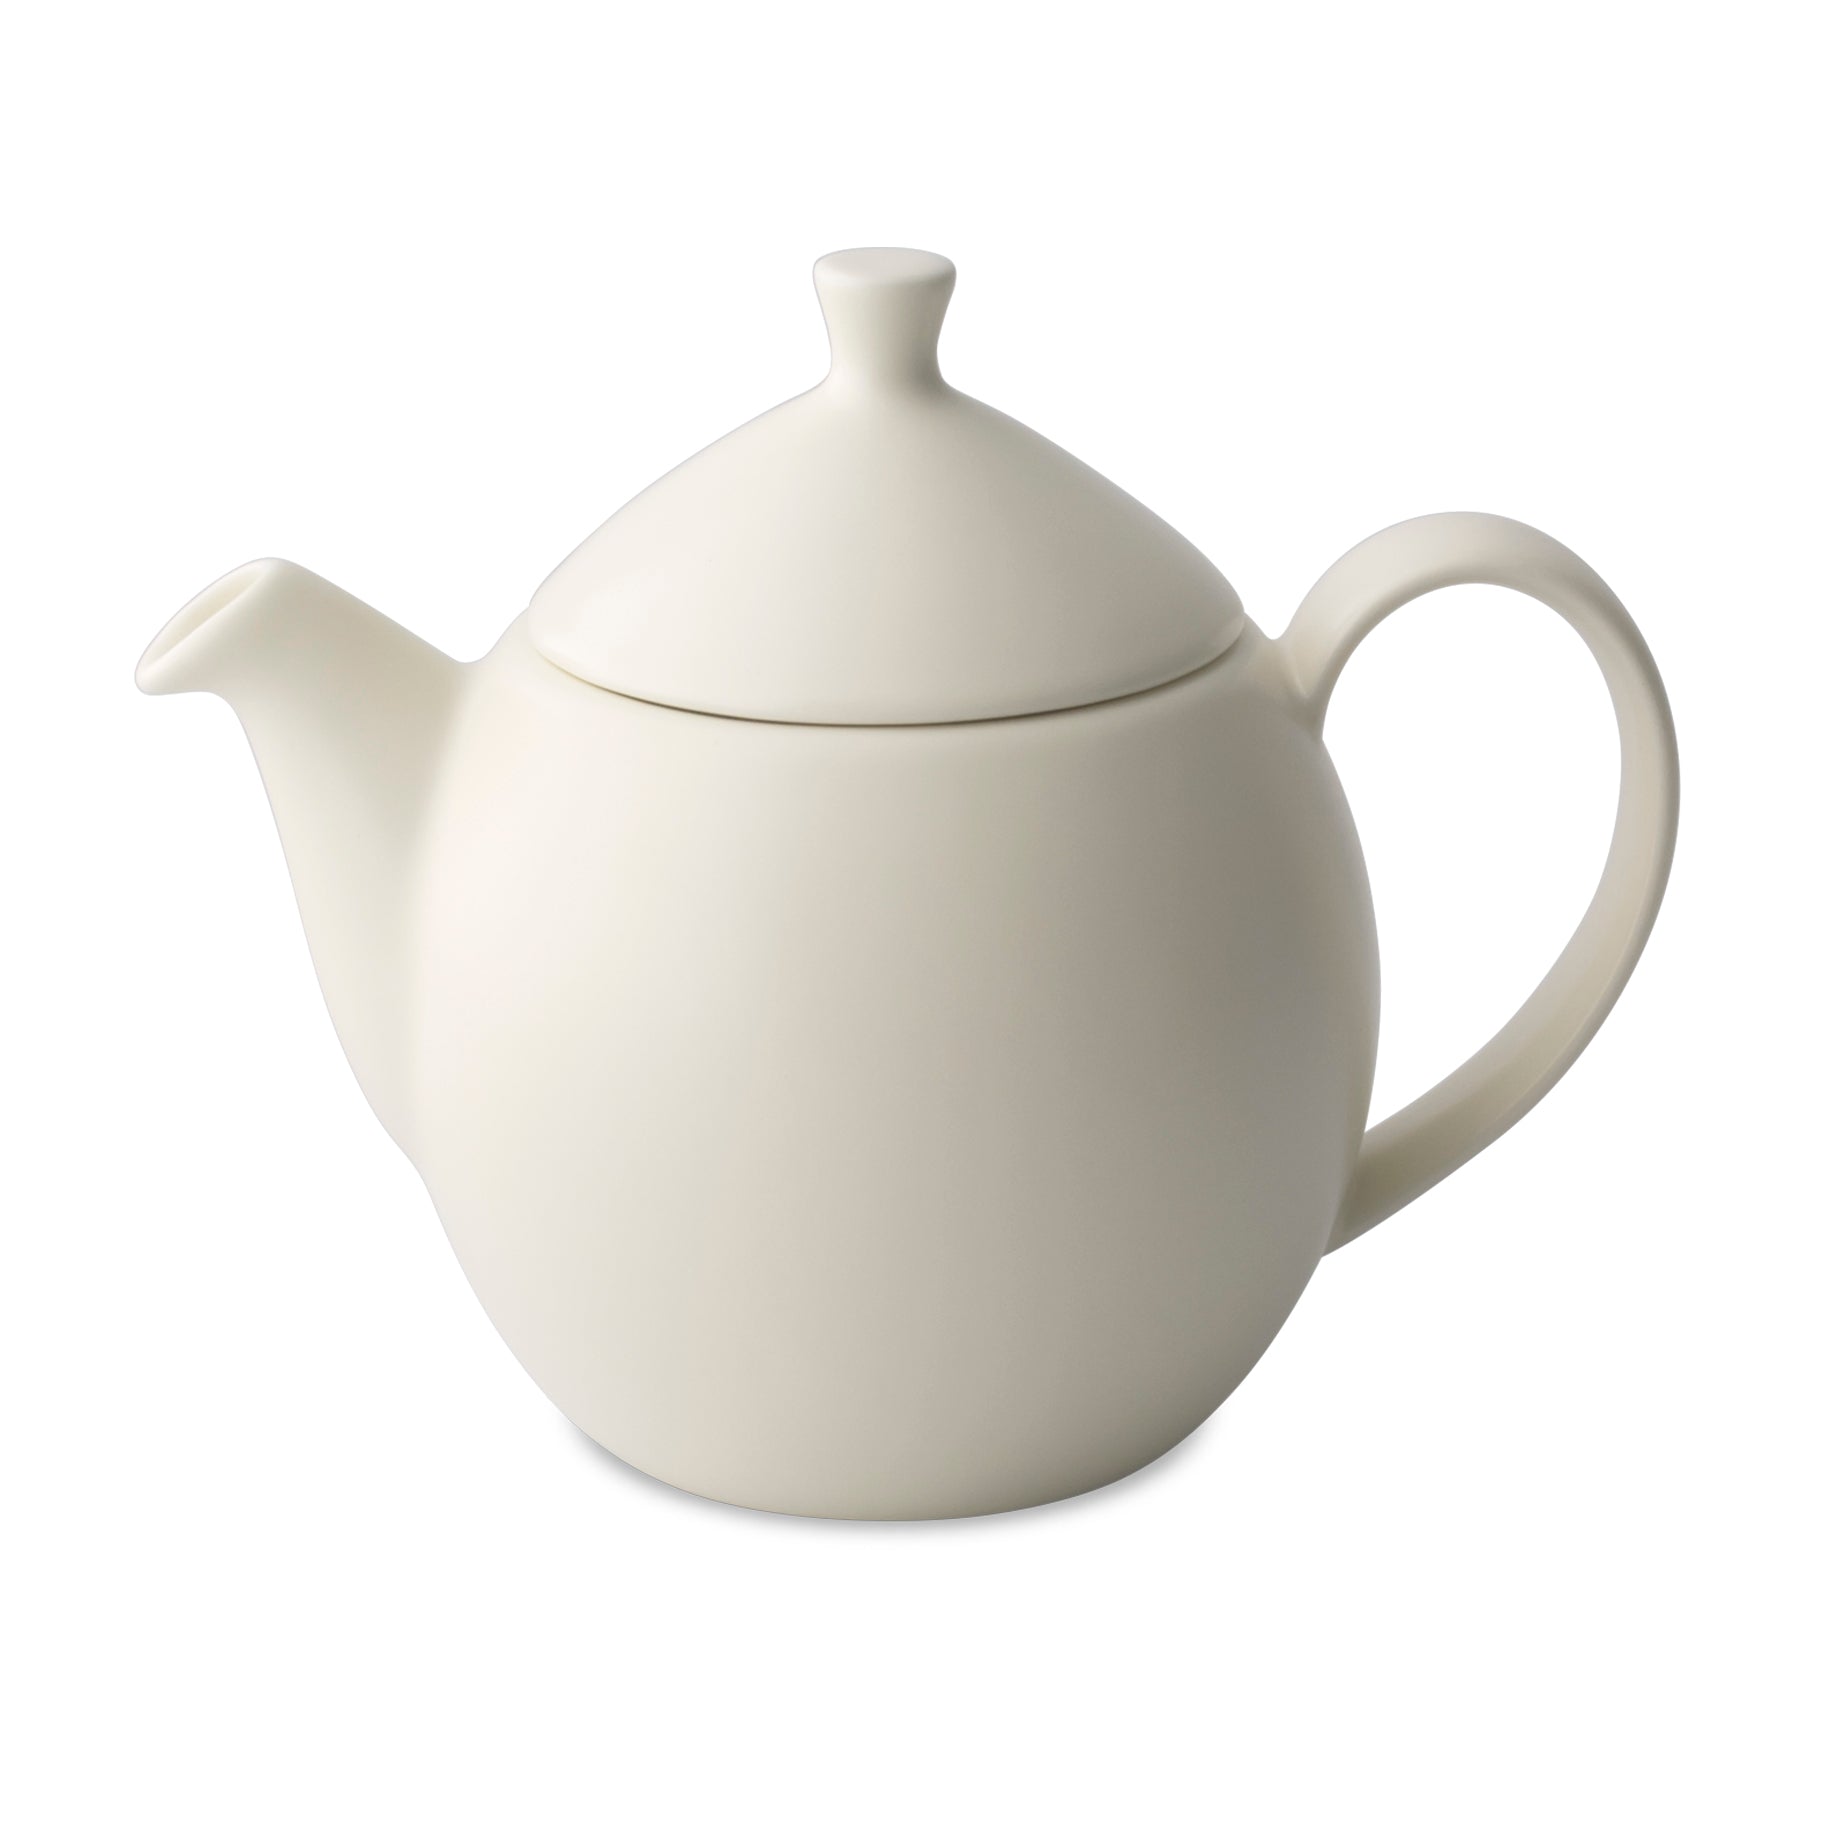 FORLIFE Hospitality Teapot with Built in Strainer 14 oz Stainless Steel